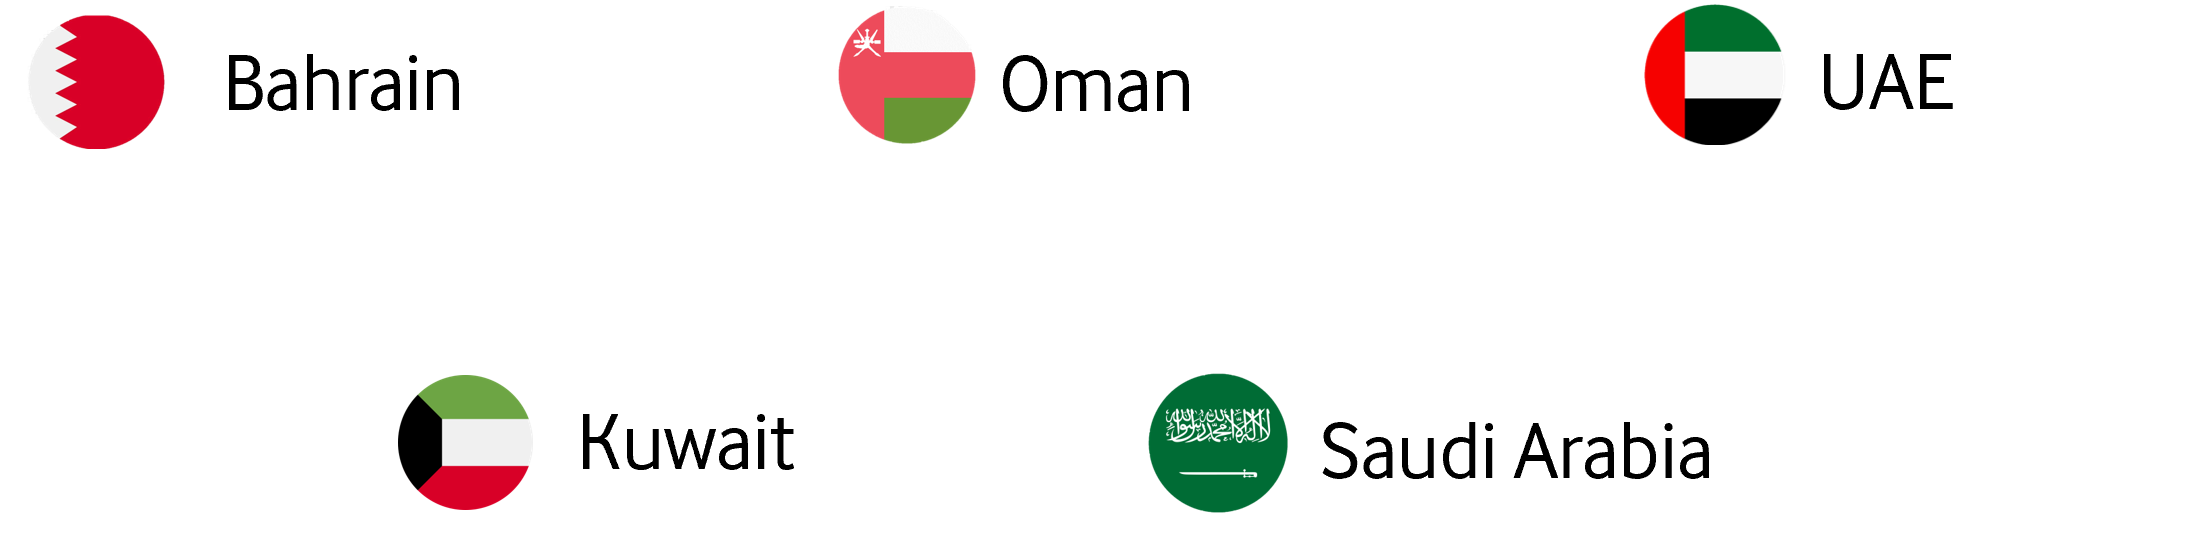 GCC 5 Countries Flag for Coverage